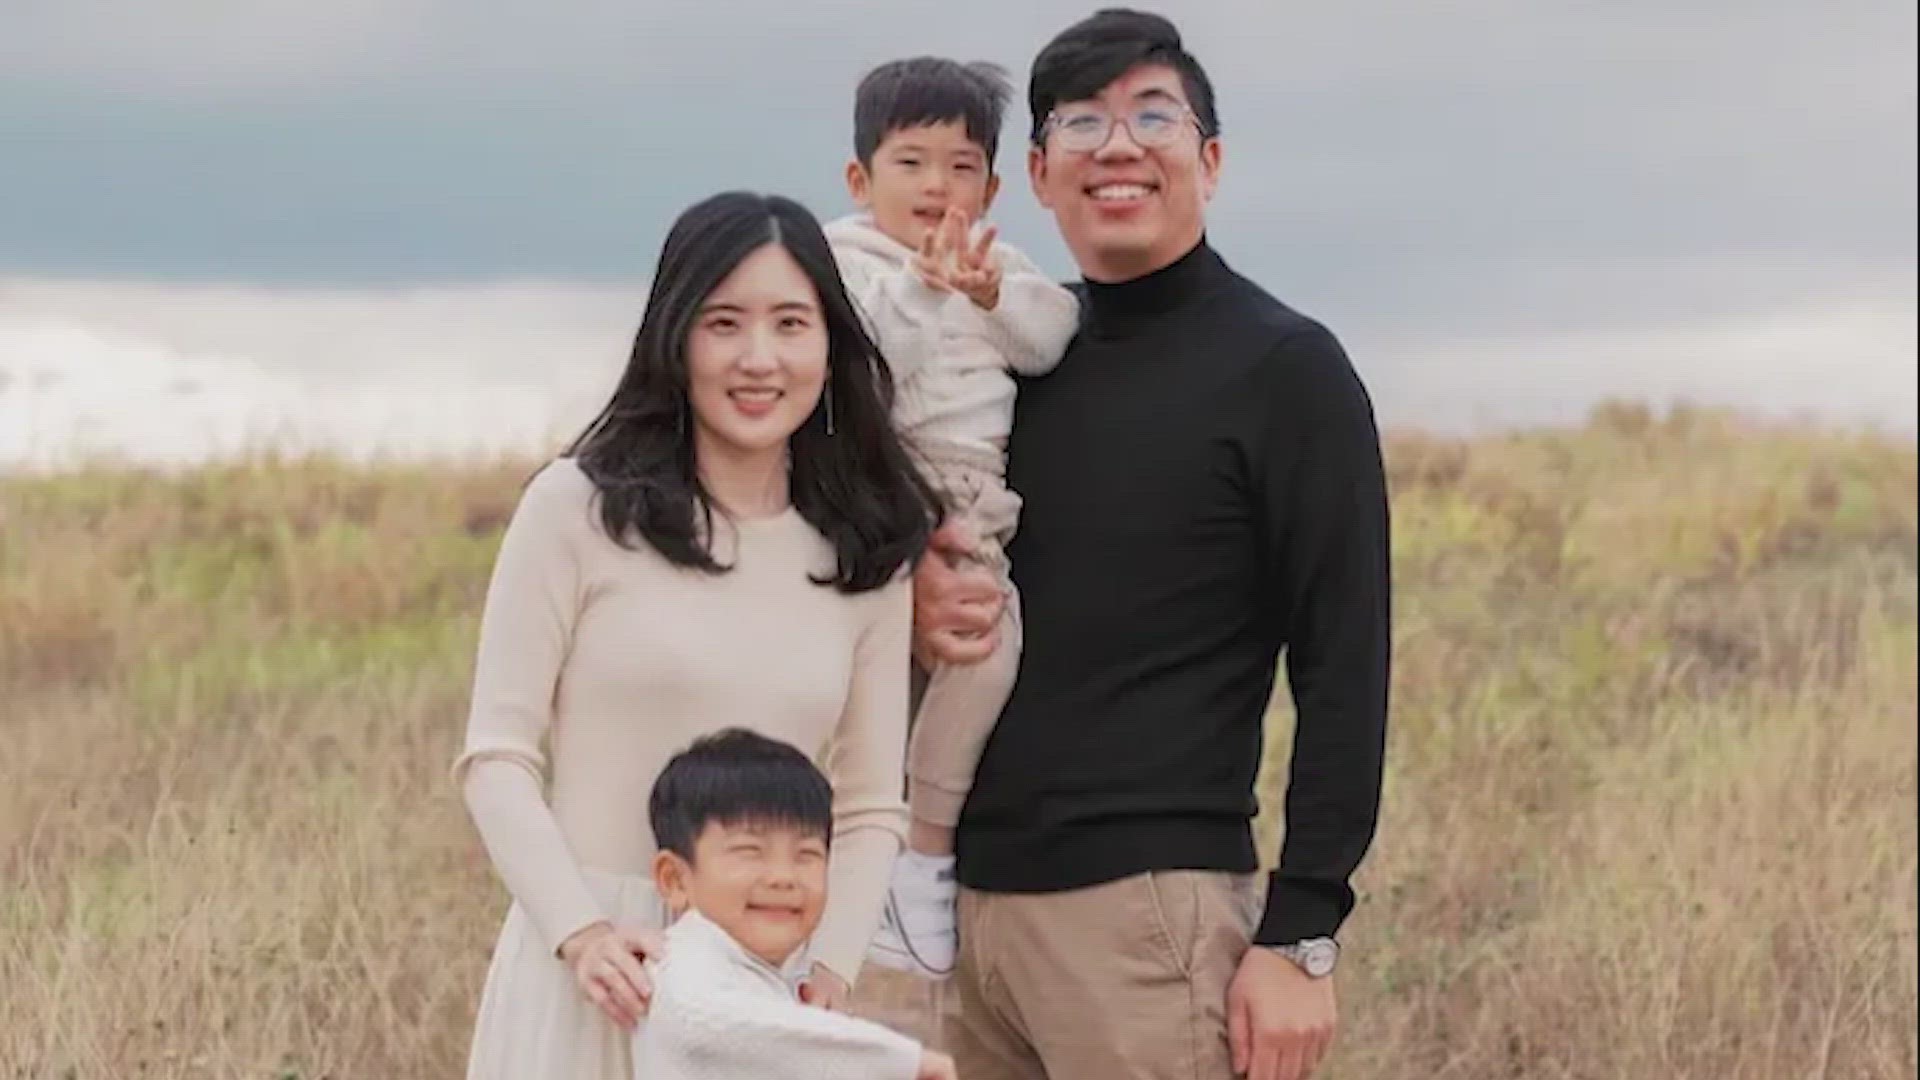 Cindy and Kyu Cho and their 3-year-old son were killed in the mass shooting last weekend. Their 6-year-old son, William, was injured but he's doing better.